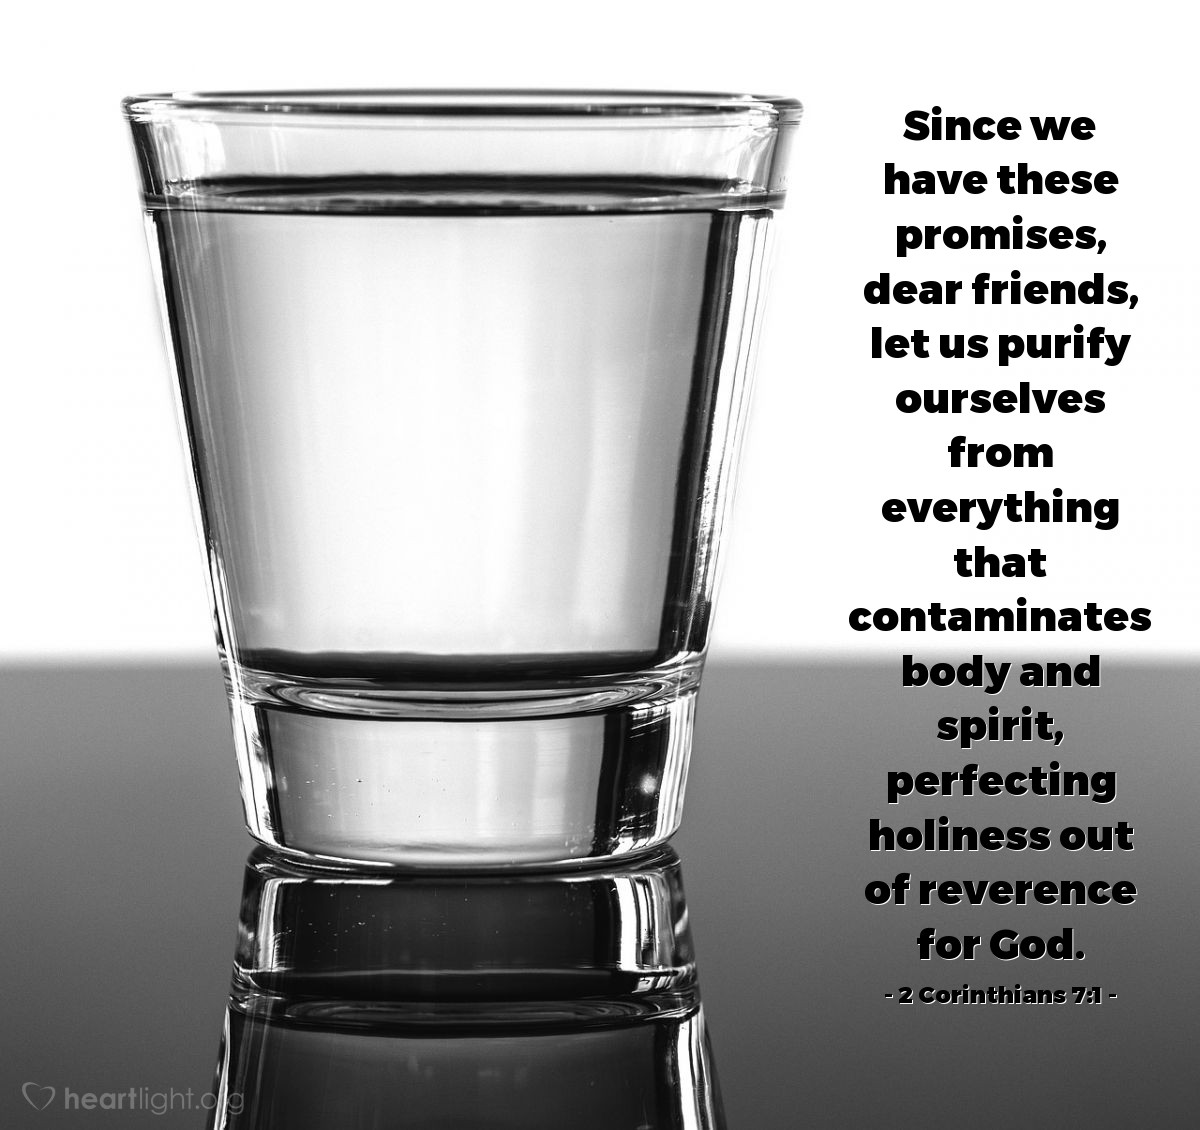 Illustration of 2 Corinthians 7:1 — Since we have these promises, dear friends, let us purify ourselves from everything that contaminates body and spirit, perfecting holiness out of reverence for God.